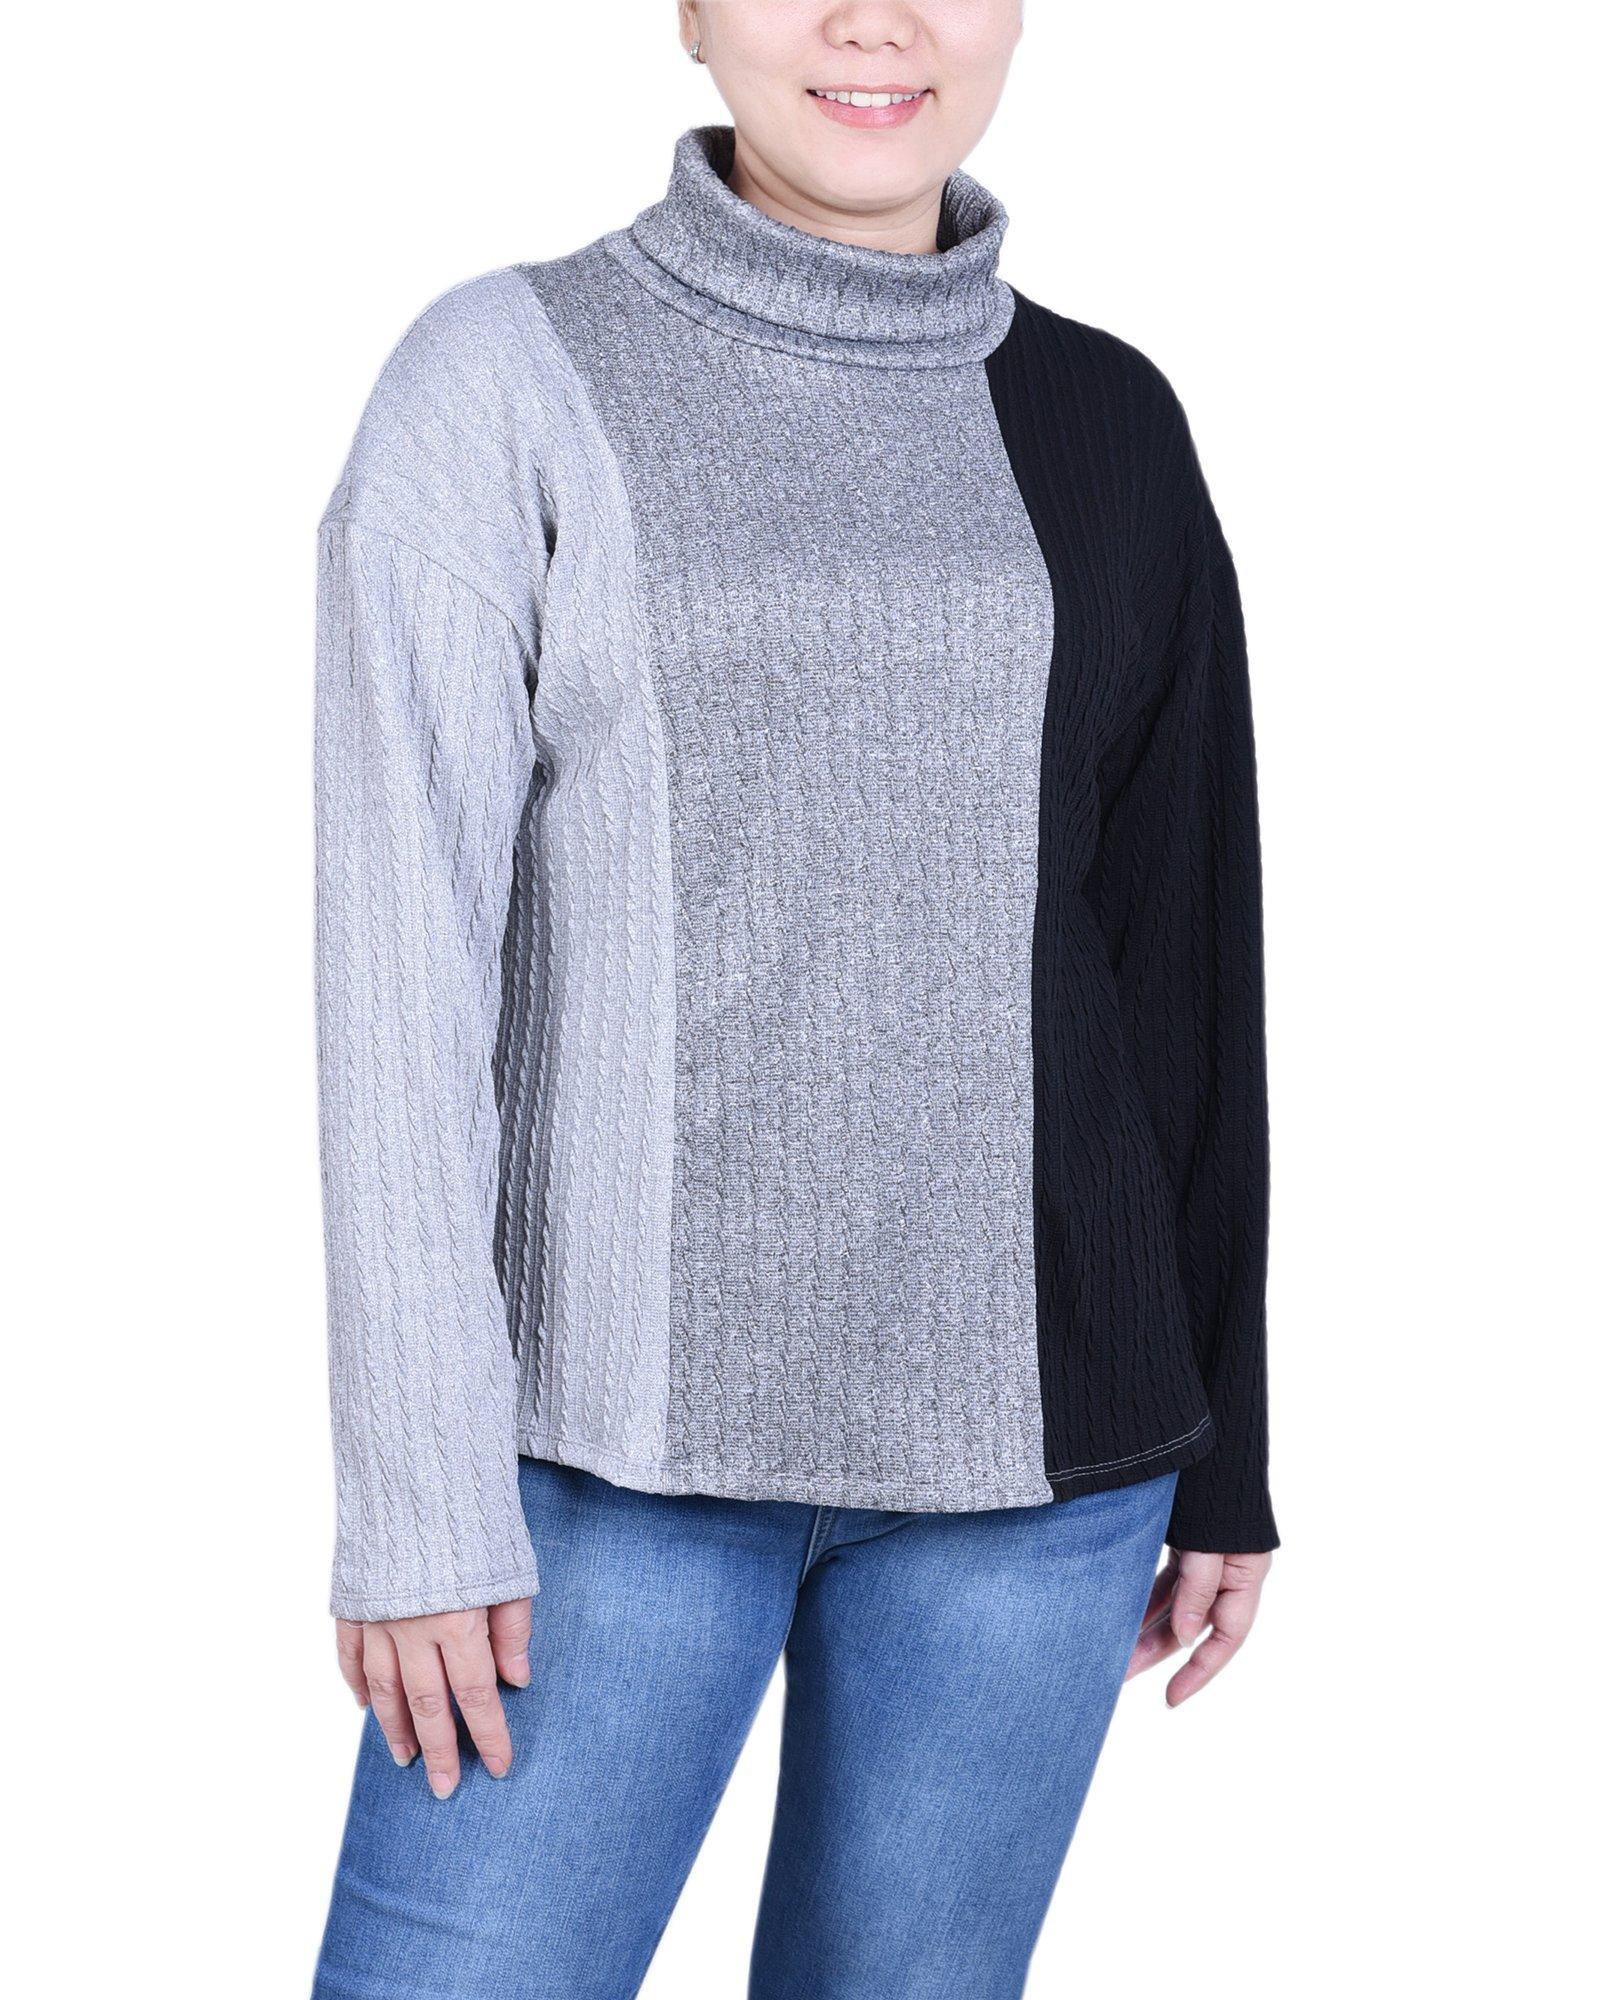 Womens Long Sleeve Colorblocked Top